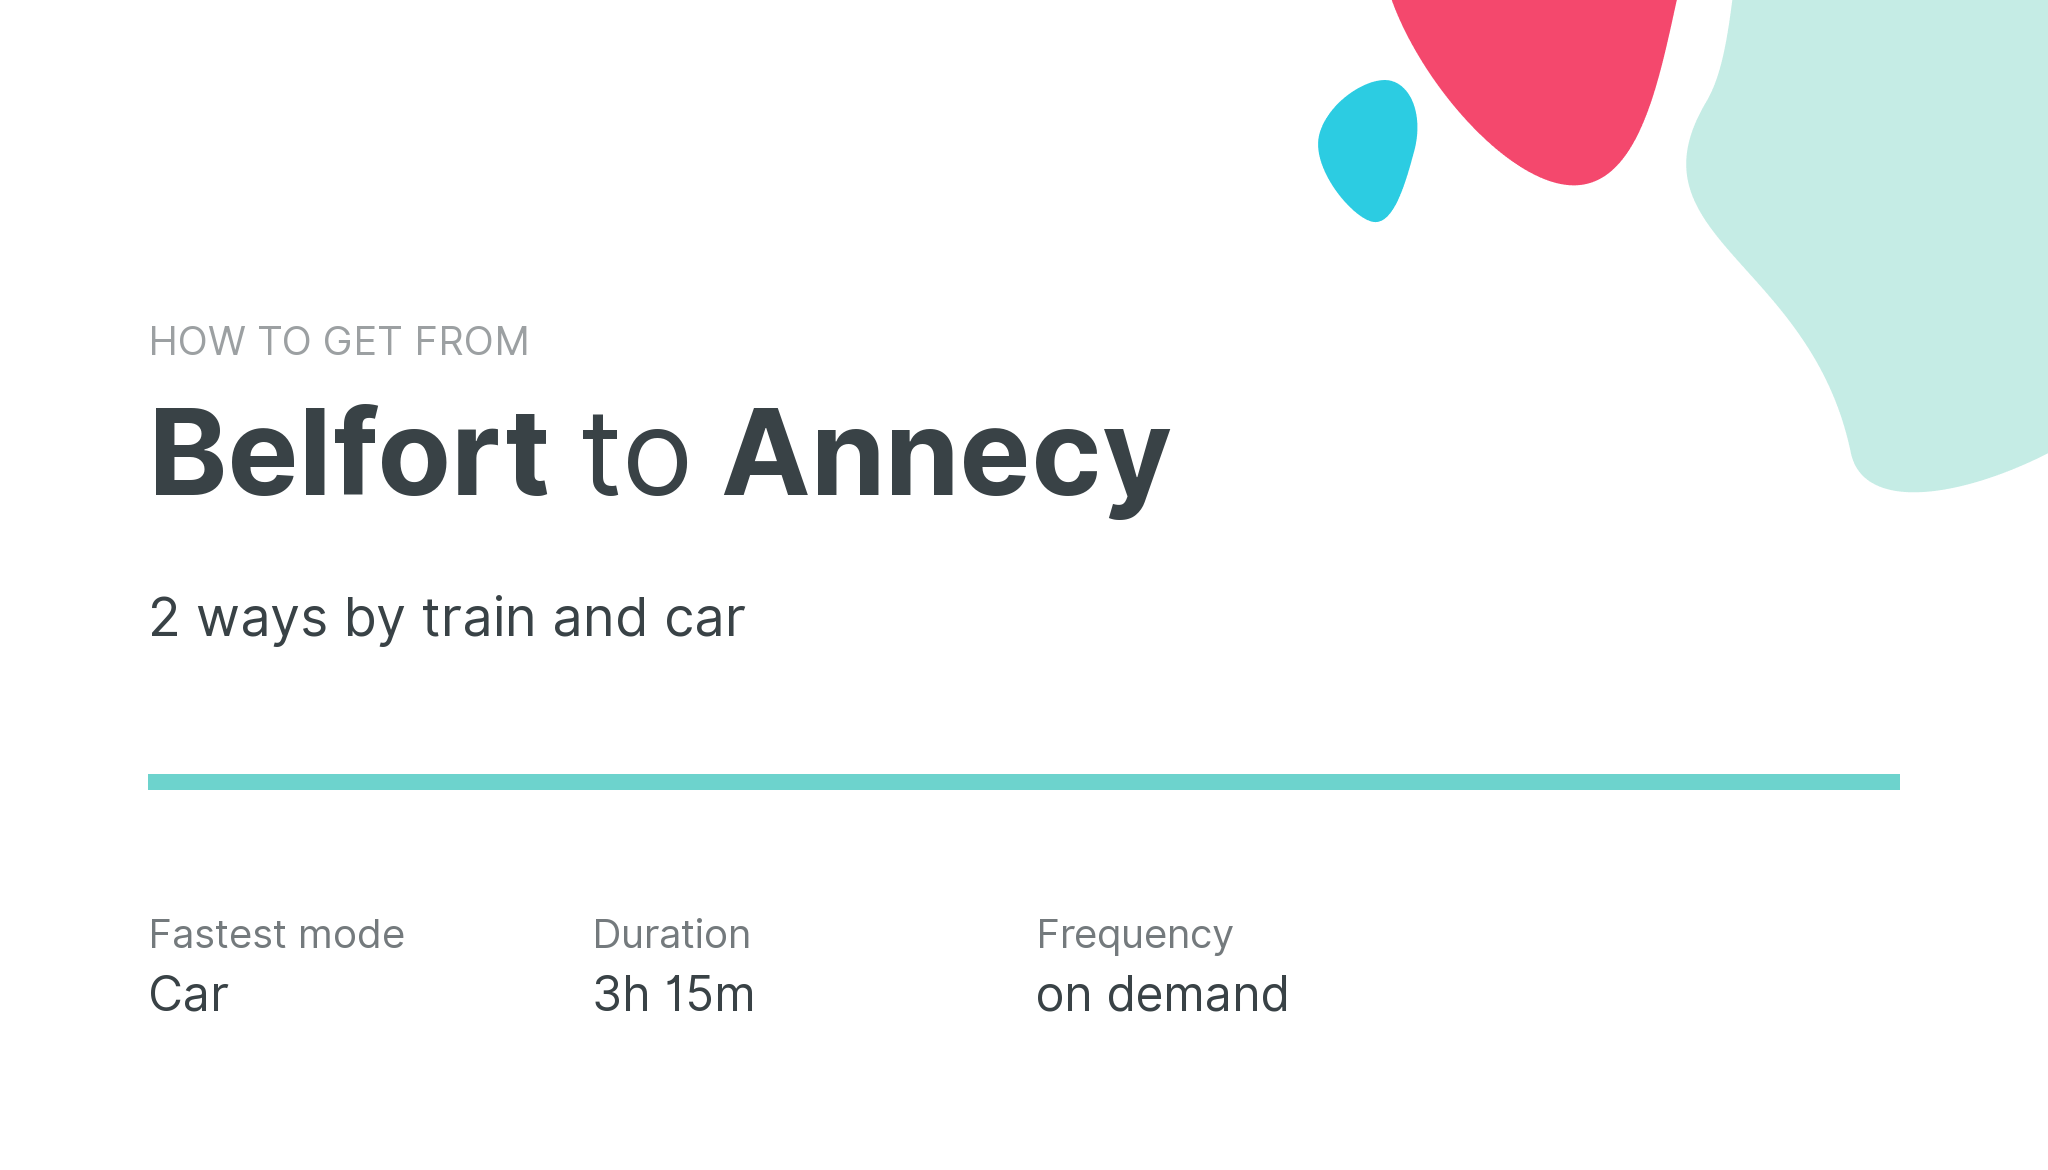 How do I get from Belfort to Annecy